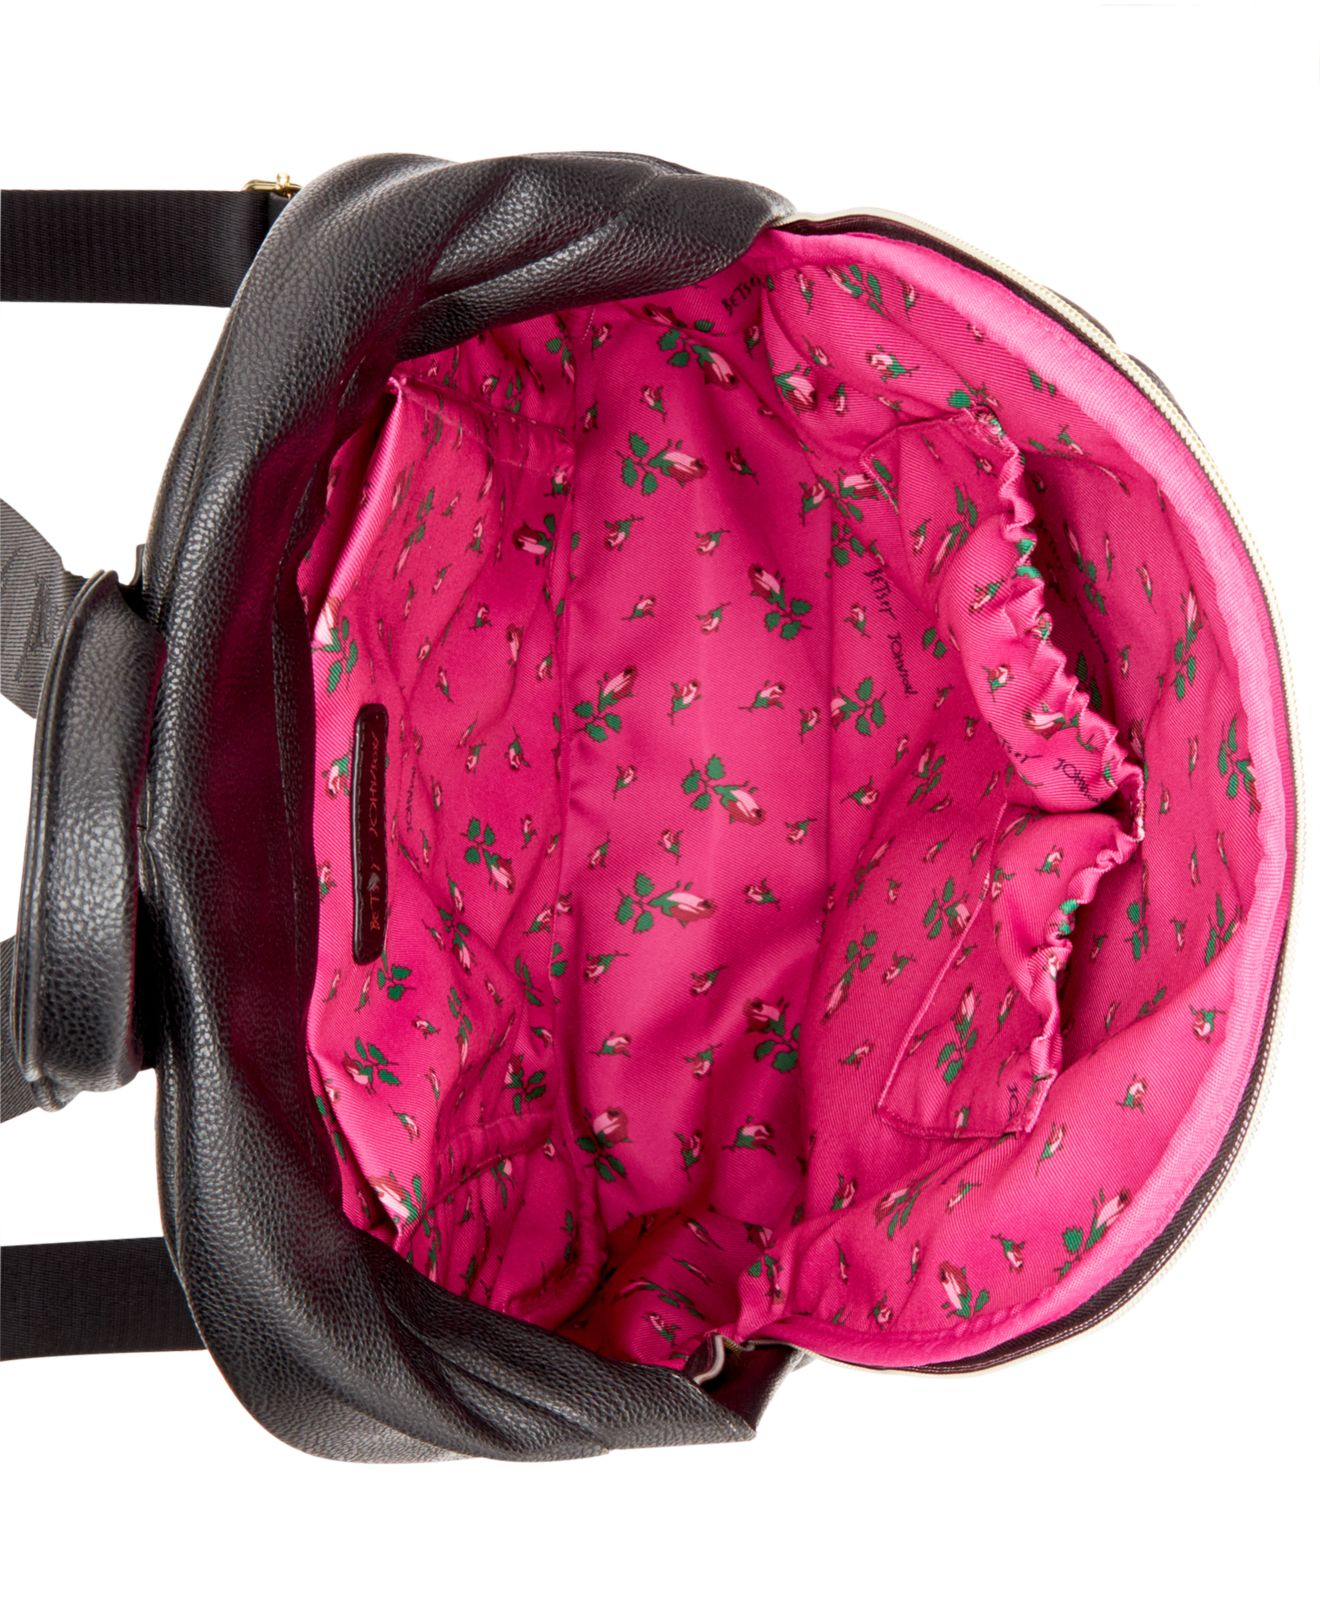 Betsey Johnson Macy's Exclusive Quilted Backpack in Black - Lyst